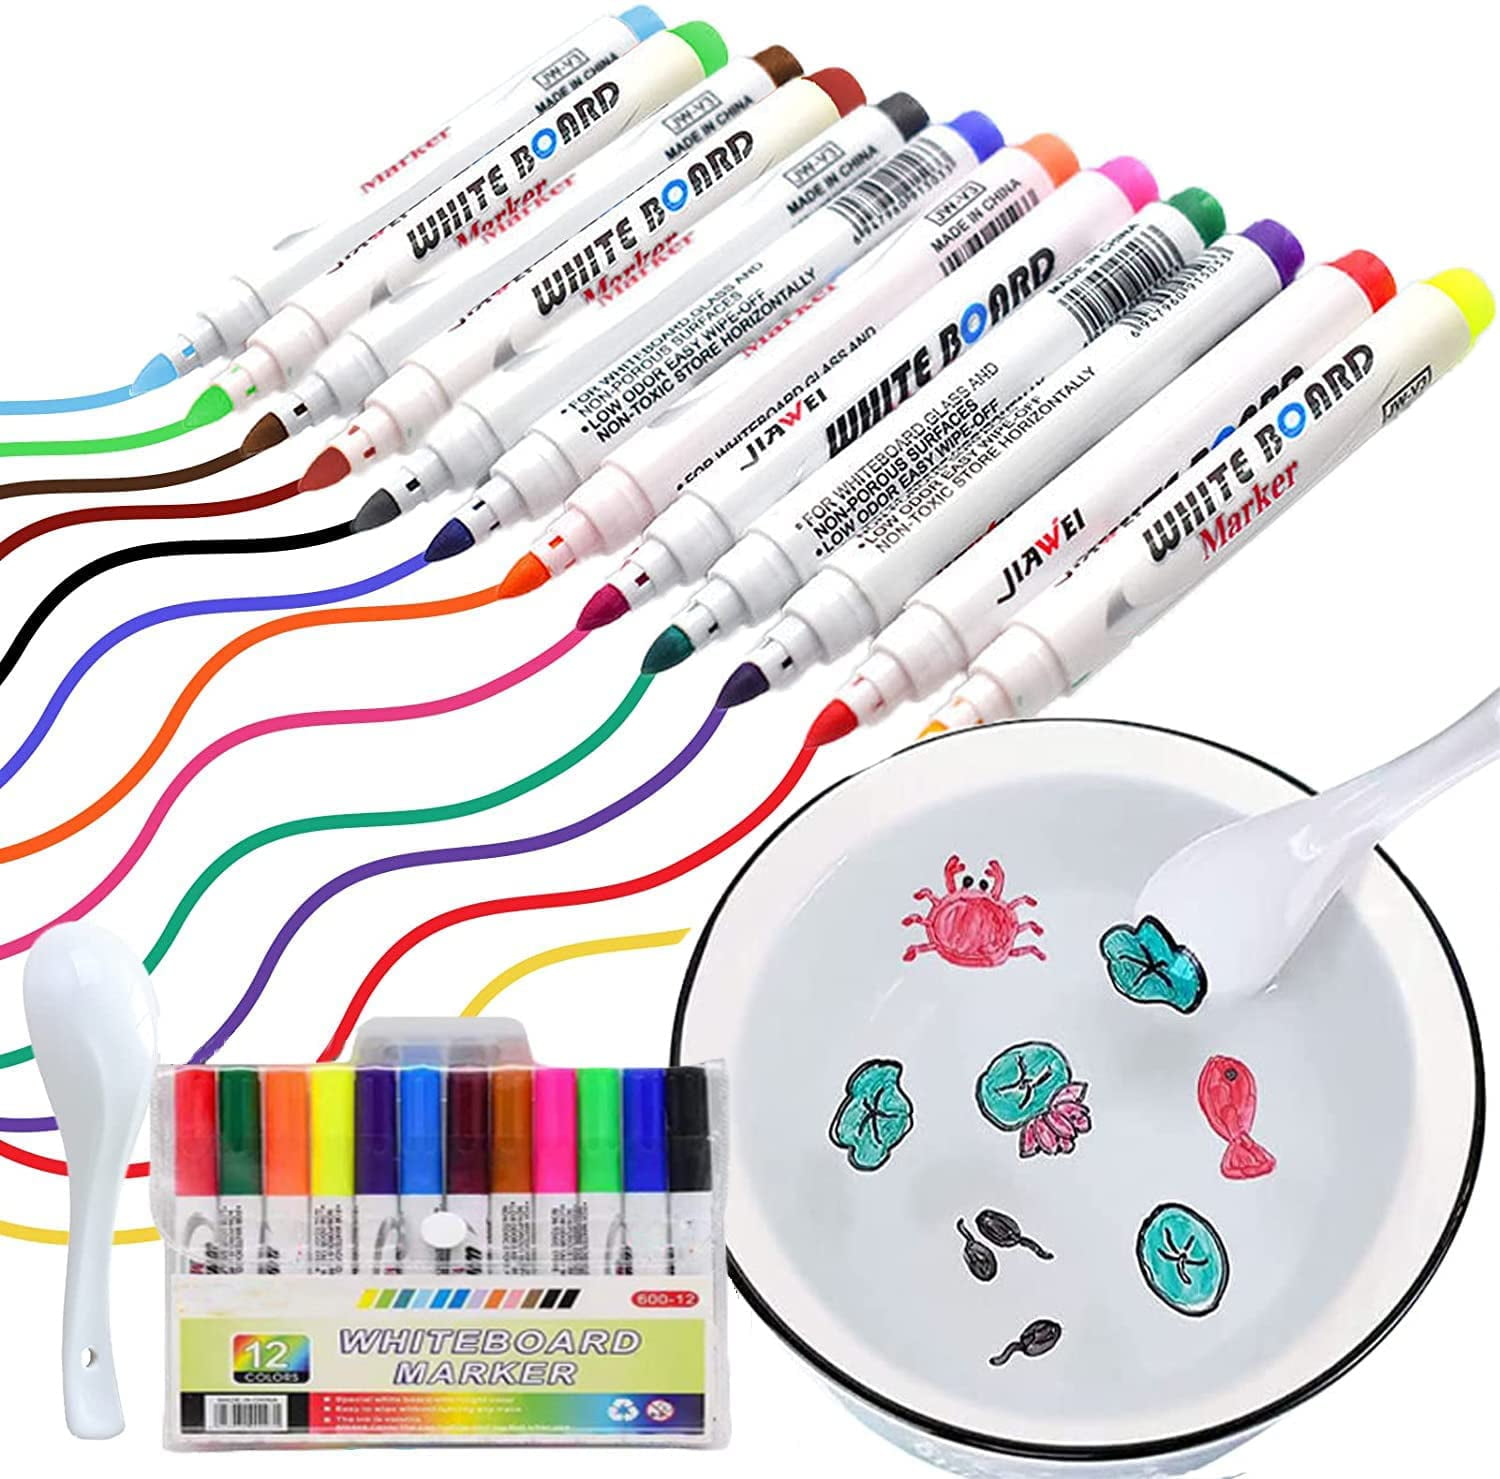 iFCOW Water Doodle Pens, Magic Water Drawing Pen for Kids 8 Pack Water Pen  Drawing Doodle Pens Water Brush for Painting Writing Pen